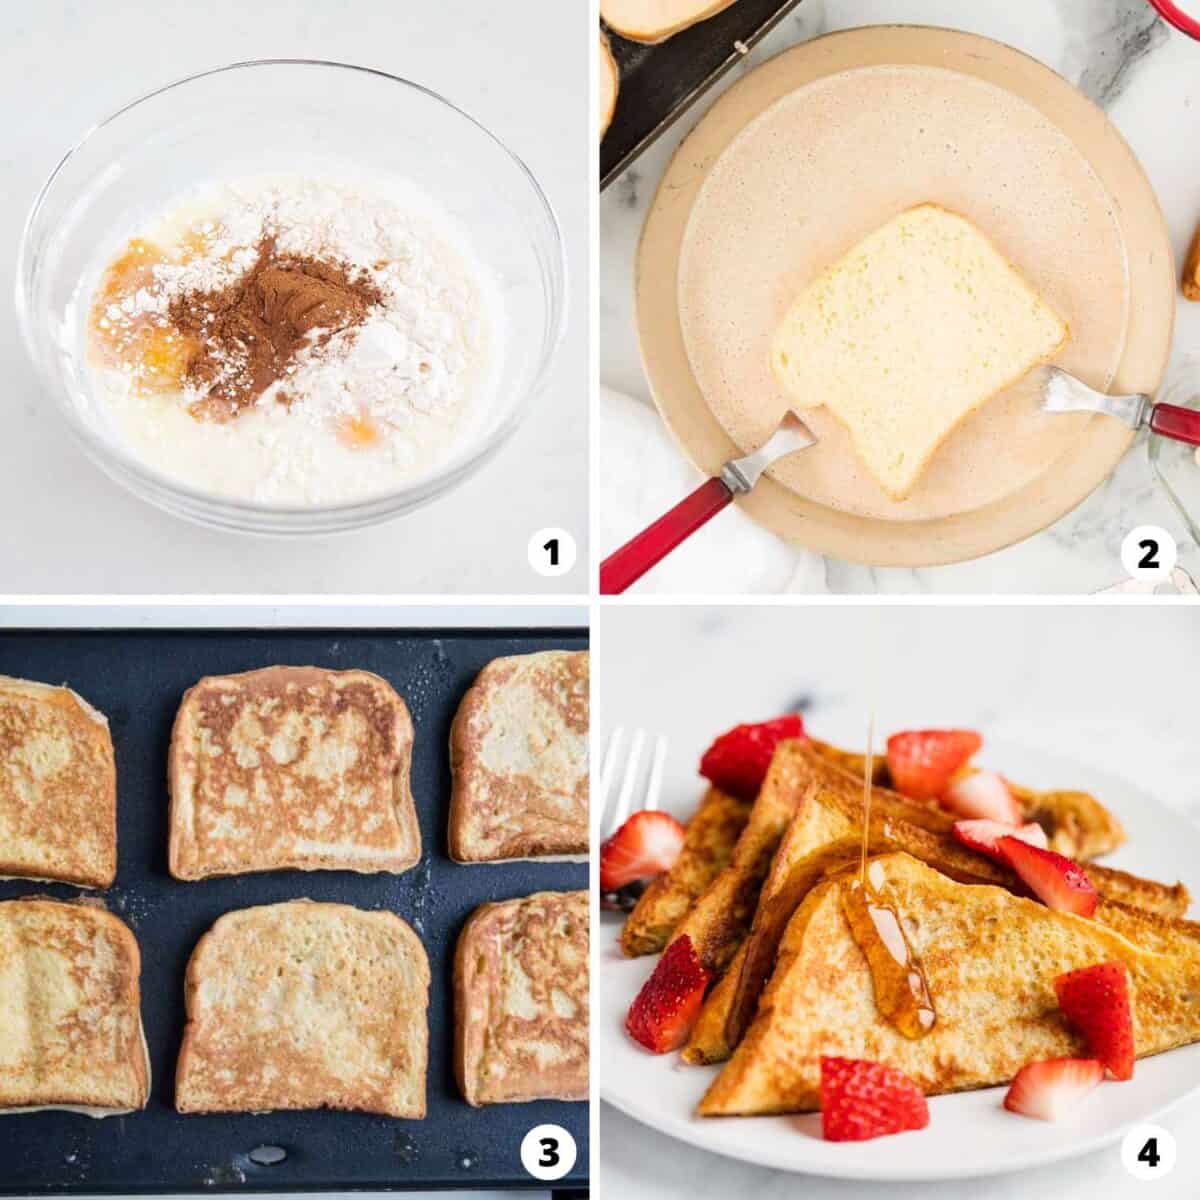 Showing how to make french toast in a 4 step collage.